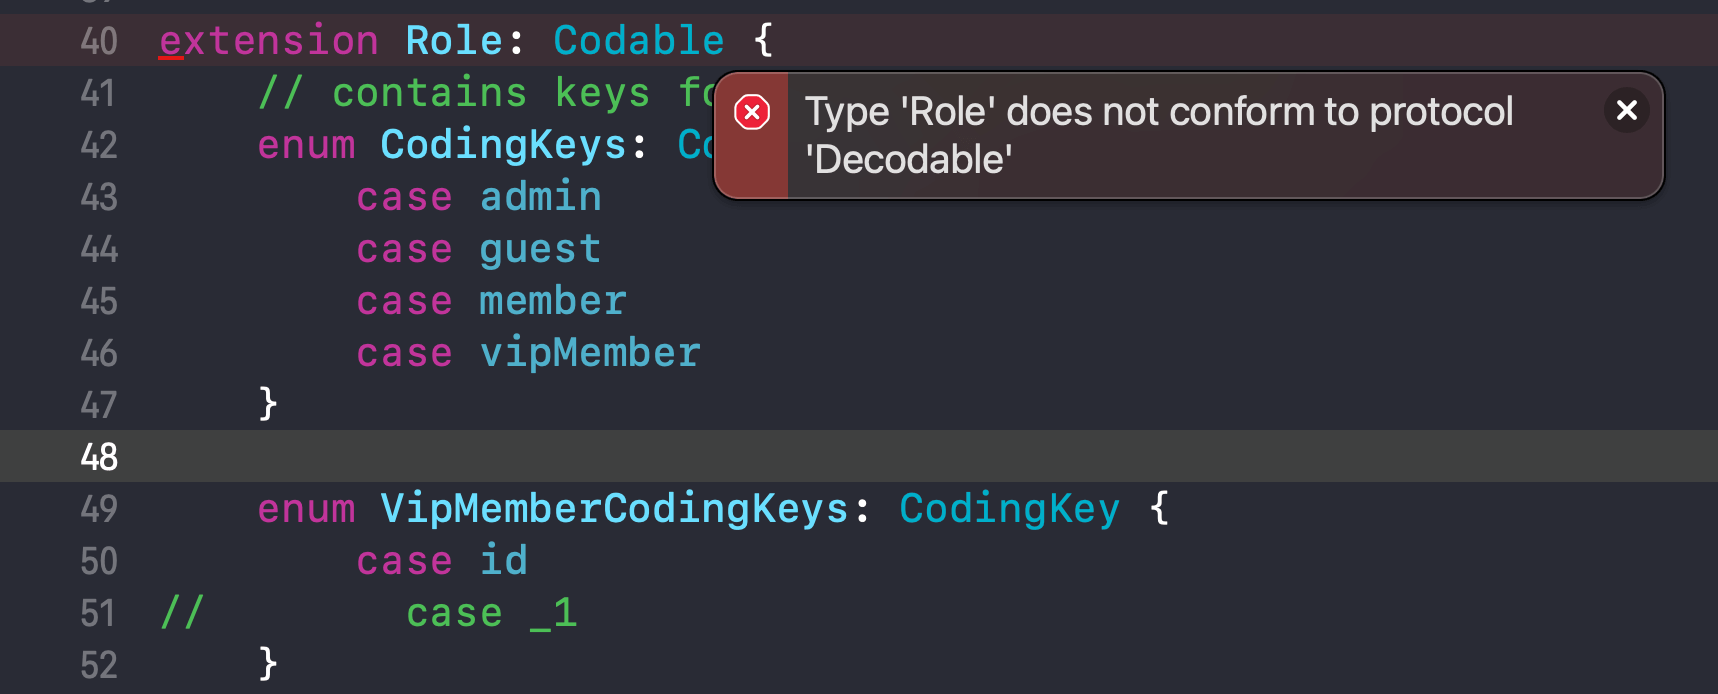 Type 'Role' does not conform to protocol 'Decodable' error.